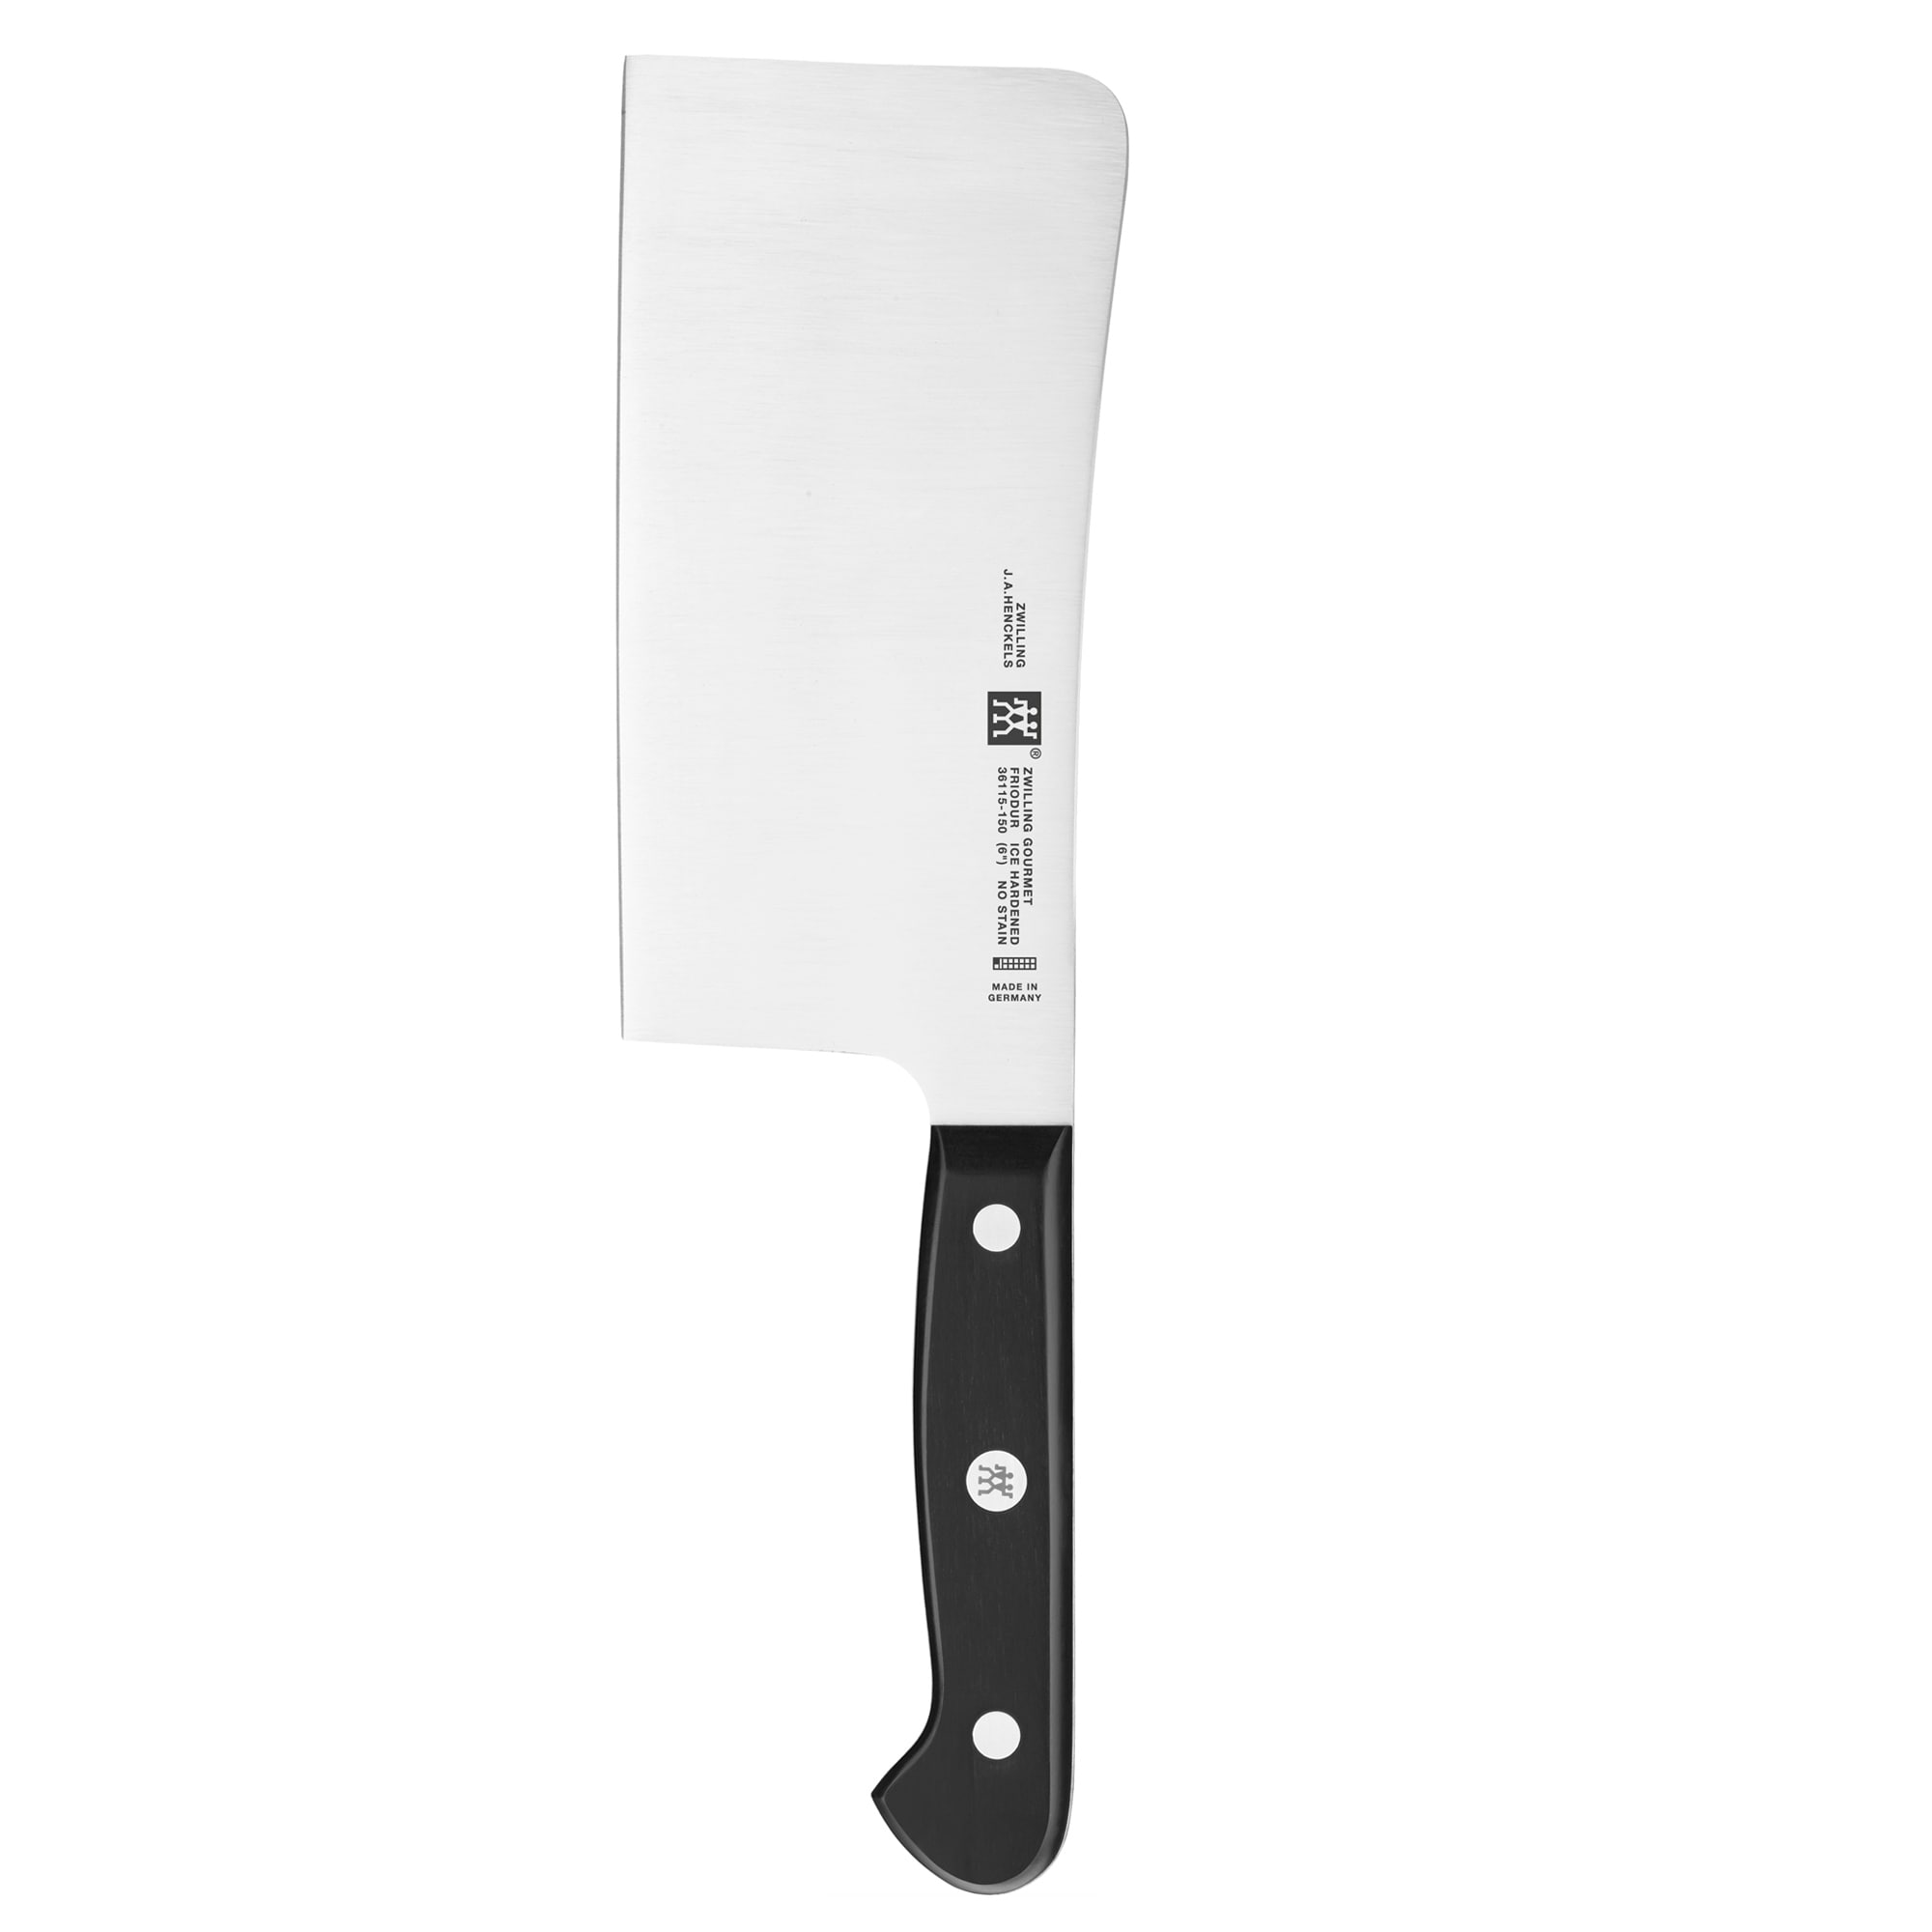 https://ak1.ostkcdn.com/images/products/is/images/direct/6af8fba4afc2240e20b3c3304ce4efa03eae9818/ZWILLING-Gourmet-6%22-Meat-Cleaver.jpg